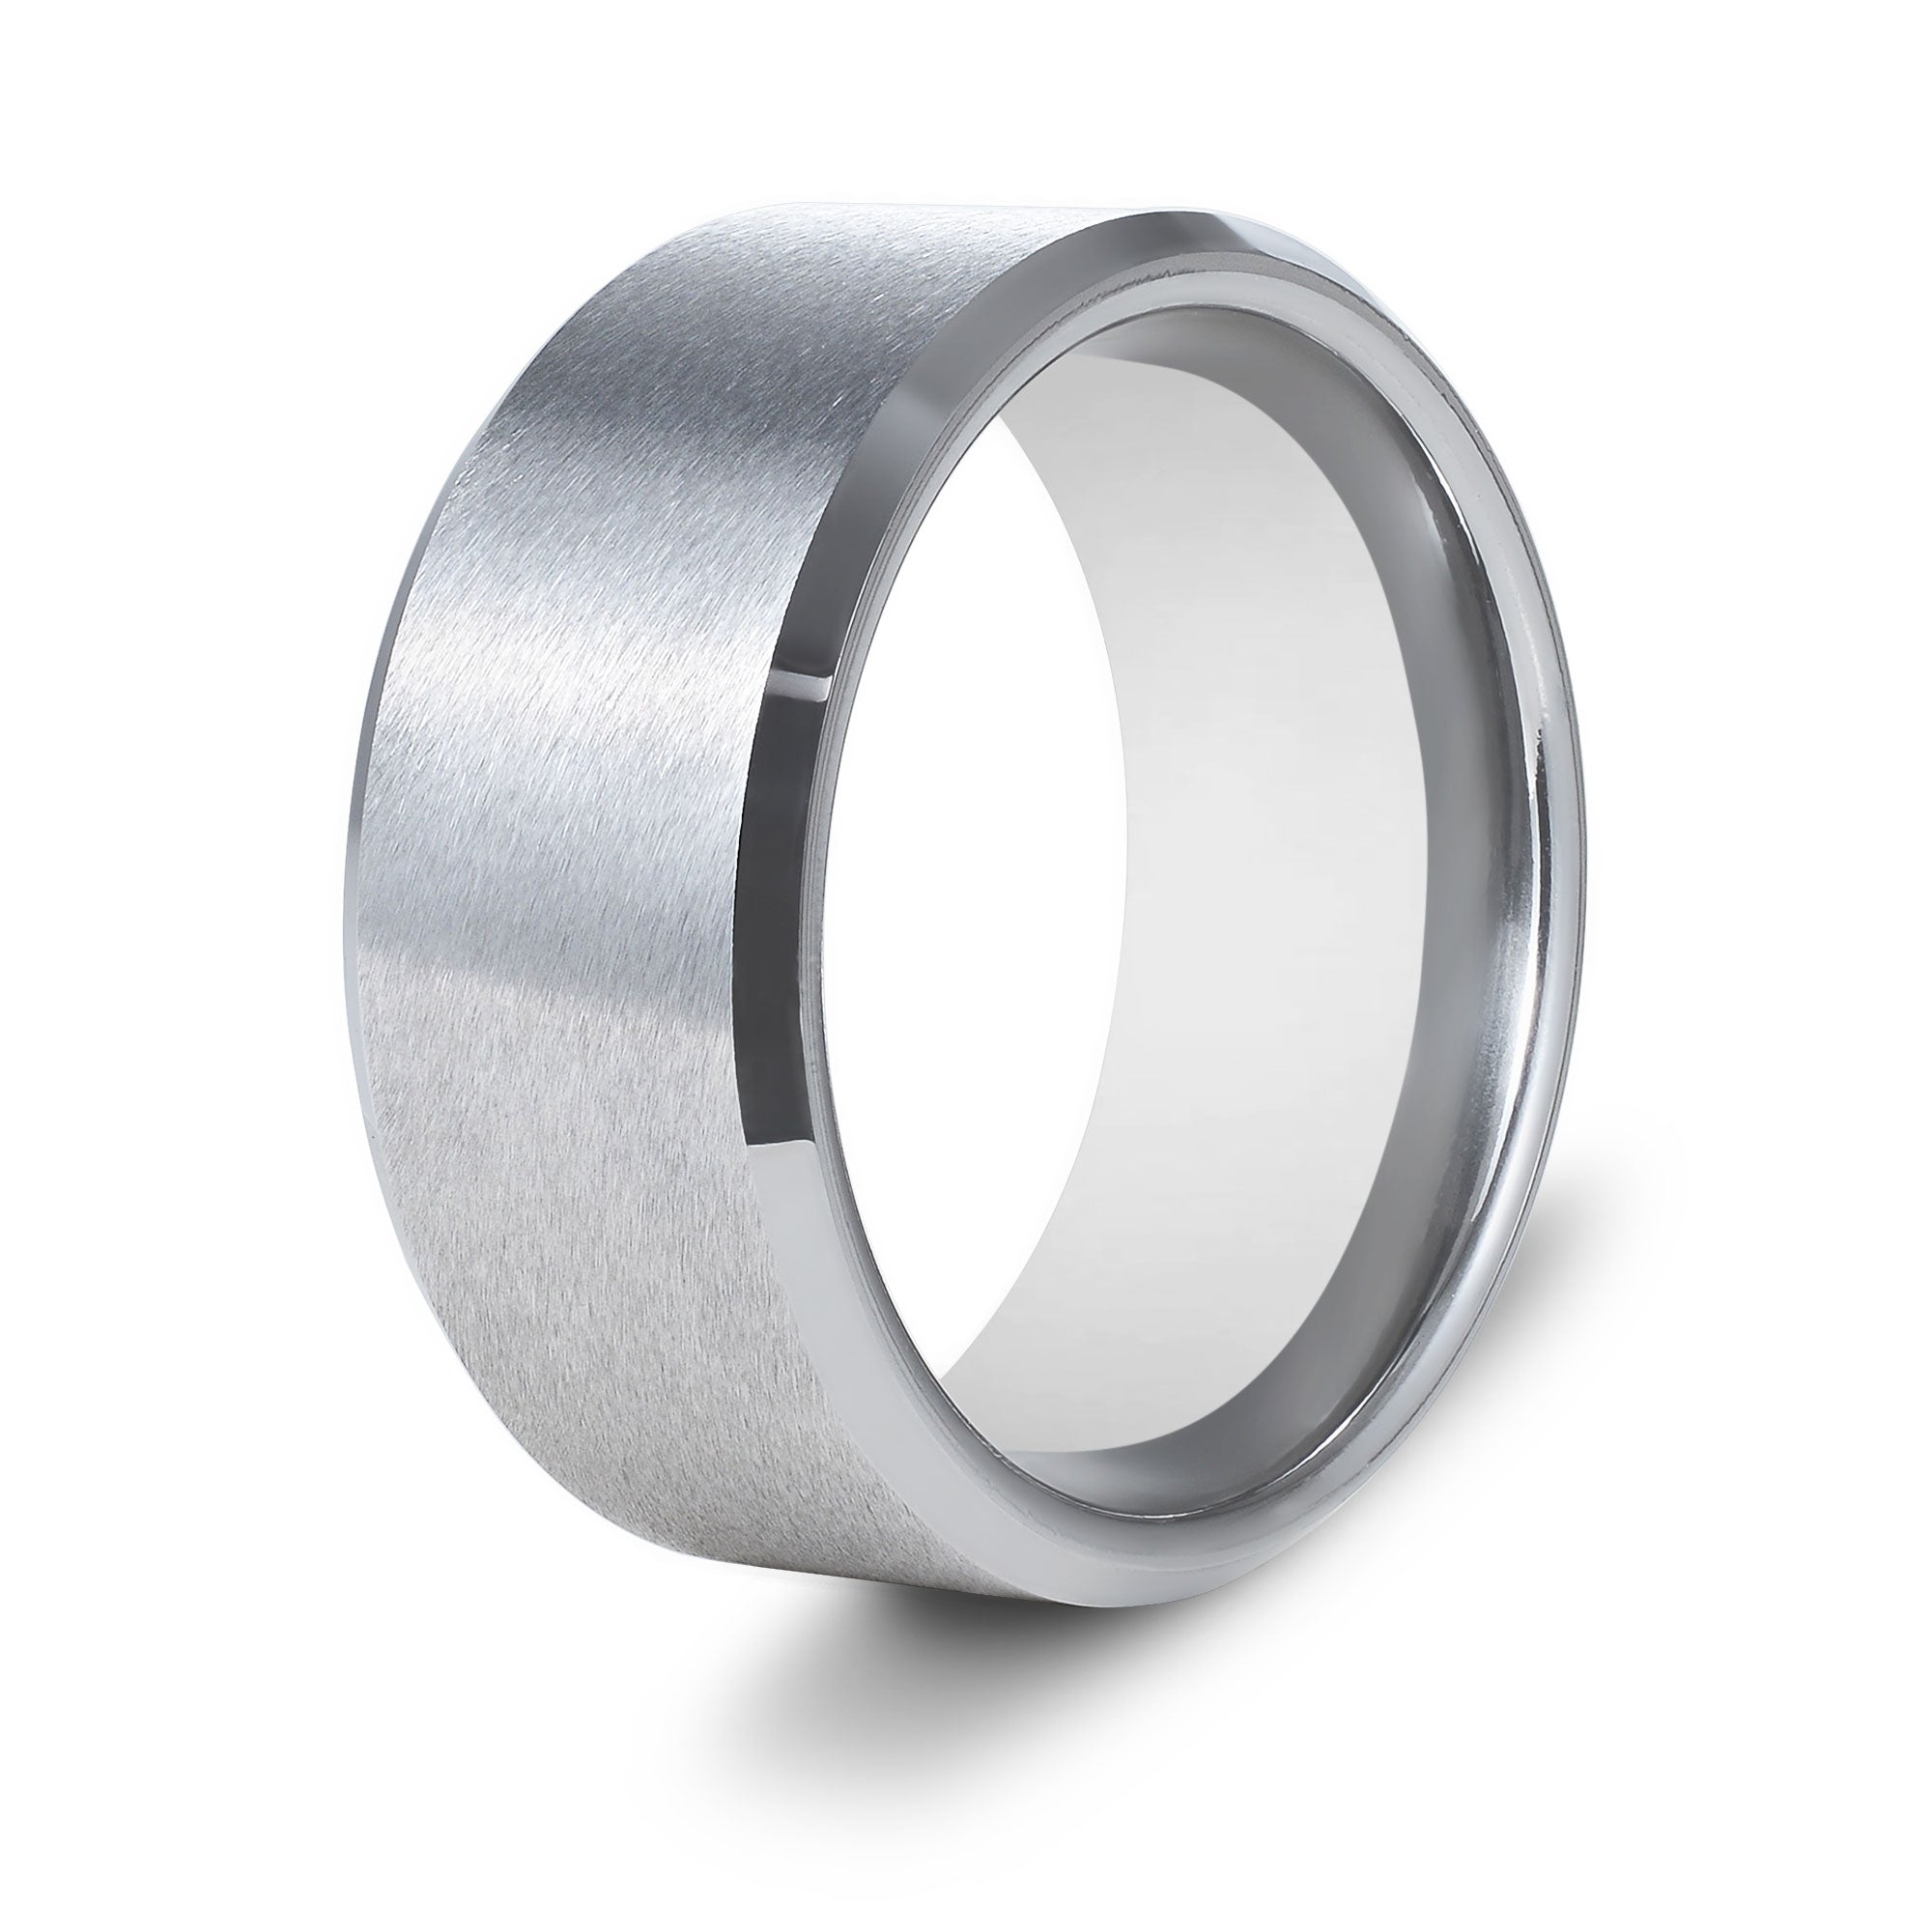 The Silver Knight - Silver 10mm Brushed Tungsten Beveled Ring